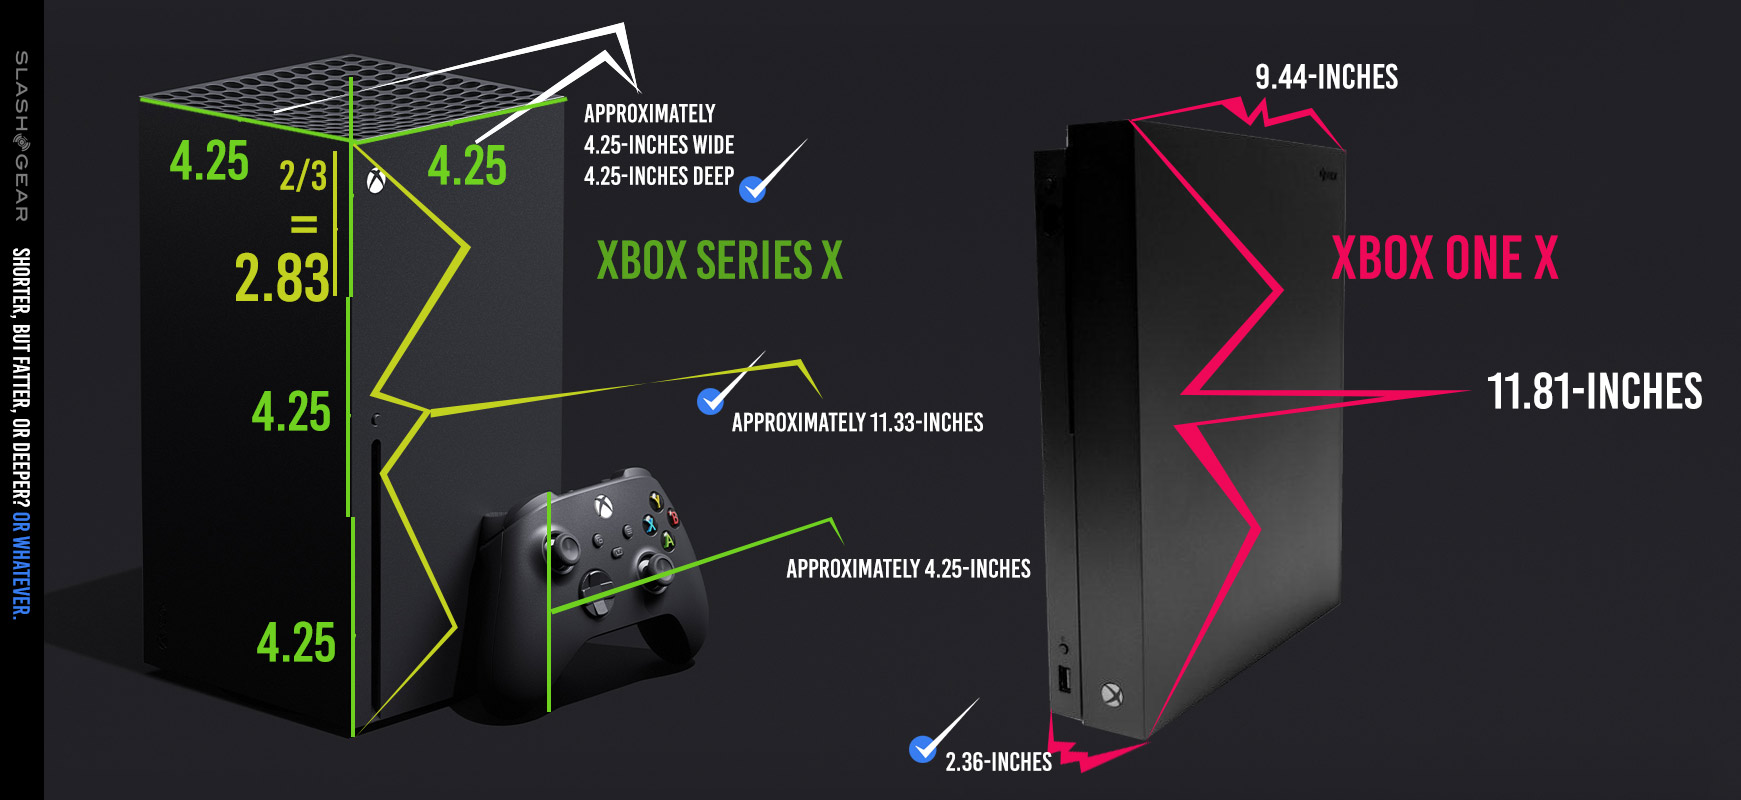 when did the xbox one series x come out